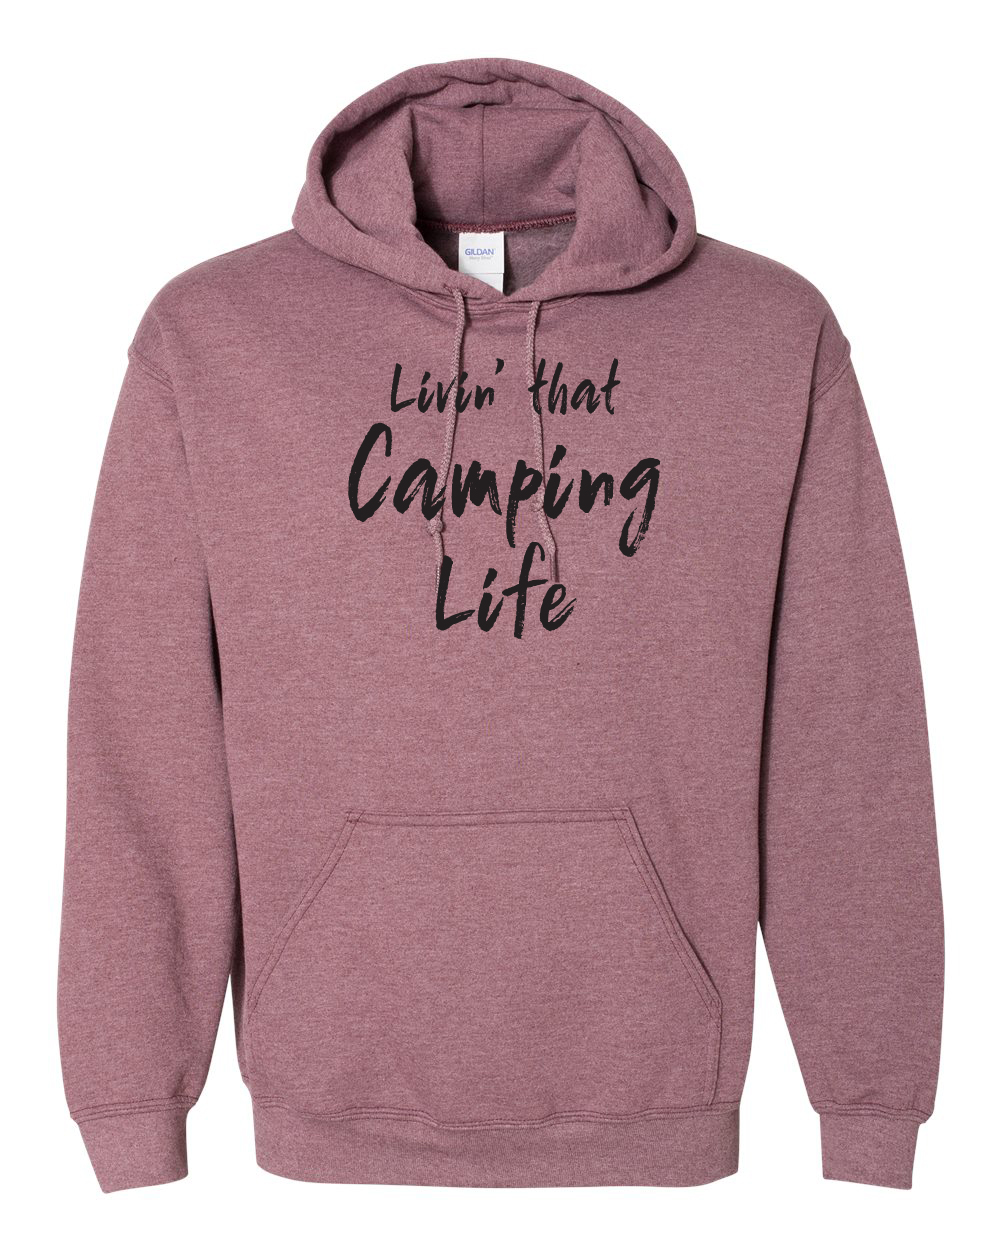 Livin' that Camping Life hoodie